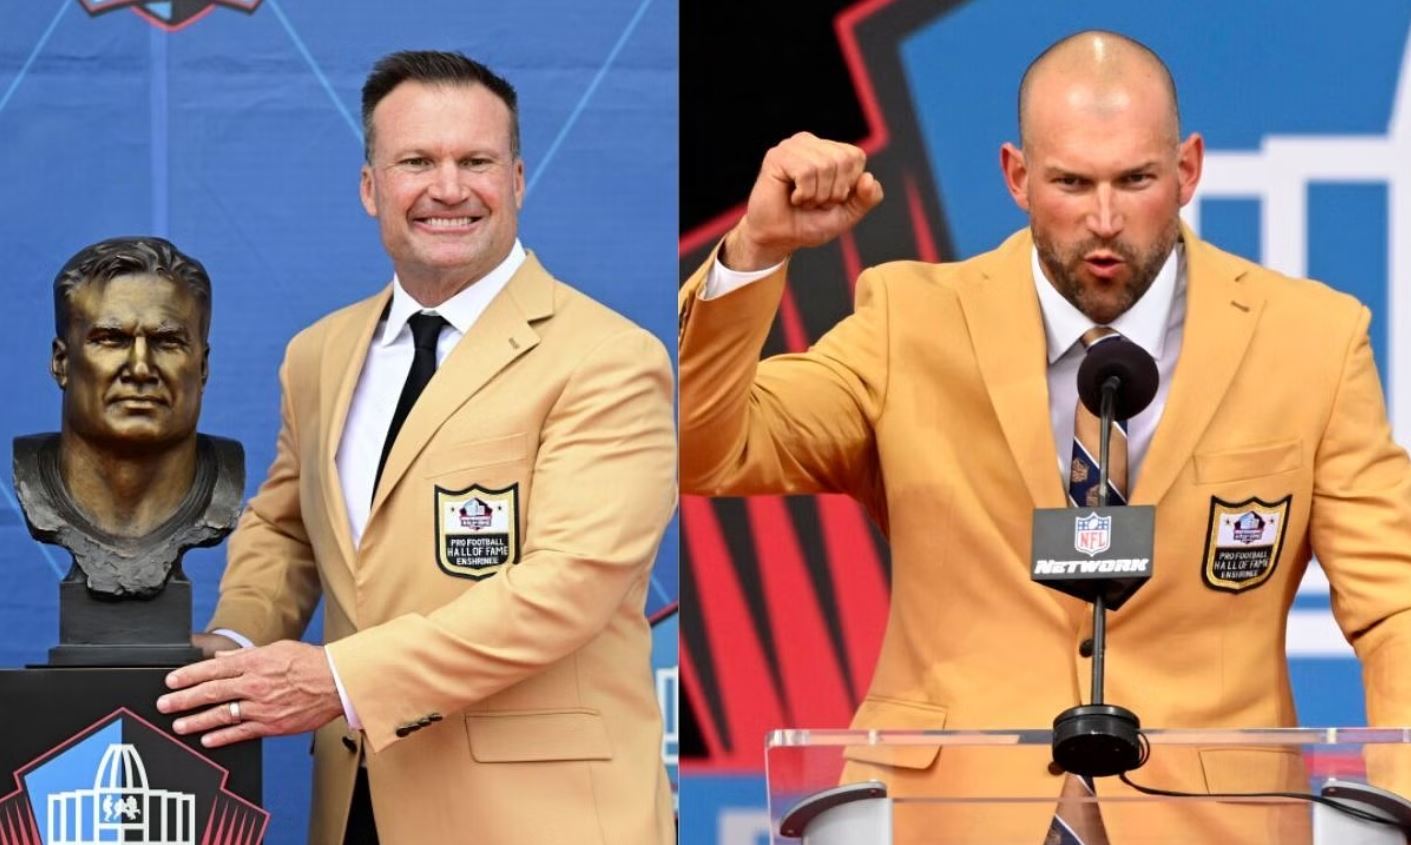 Joe Thomas And Zach Thomas Related? Family And Net Worth Difference